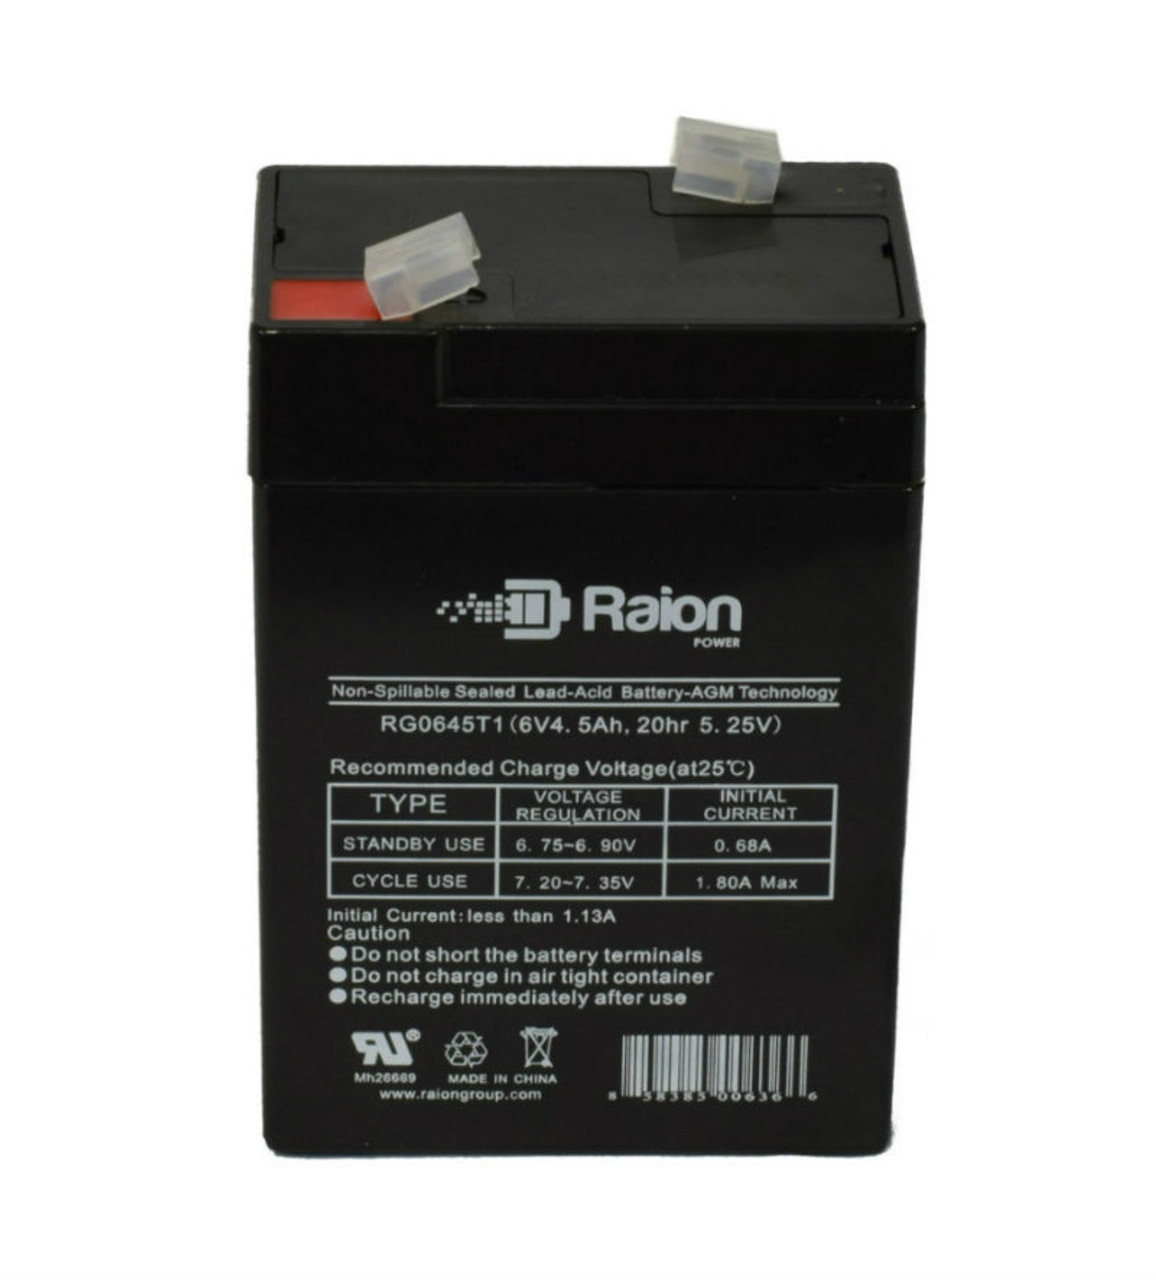 Raion Power RG0645T1 Replacement Battery Cartridge for Baxter Healthcare SM0200 Bentley Oxygen